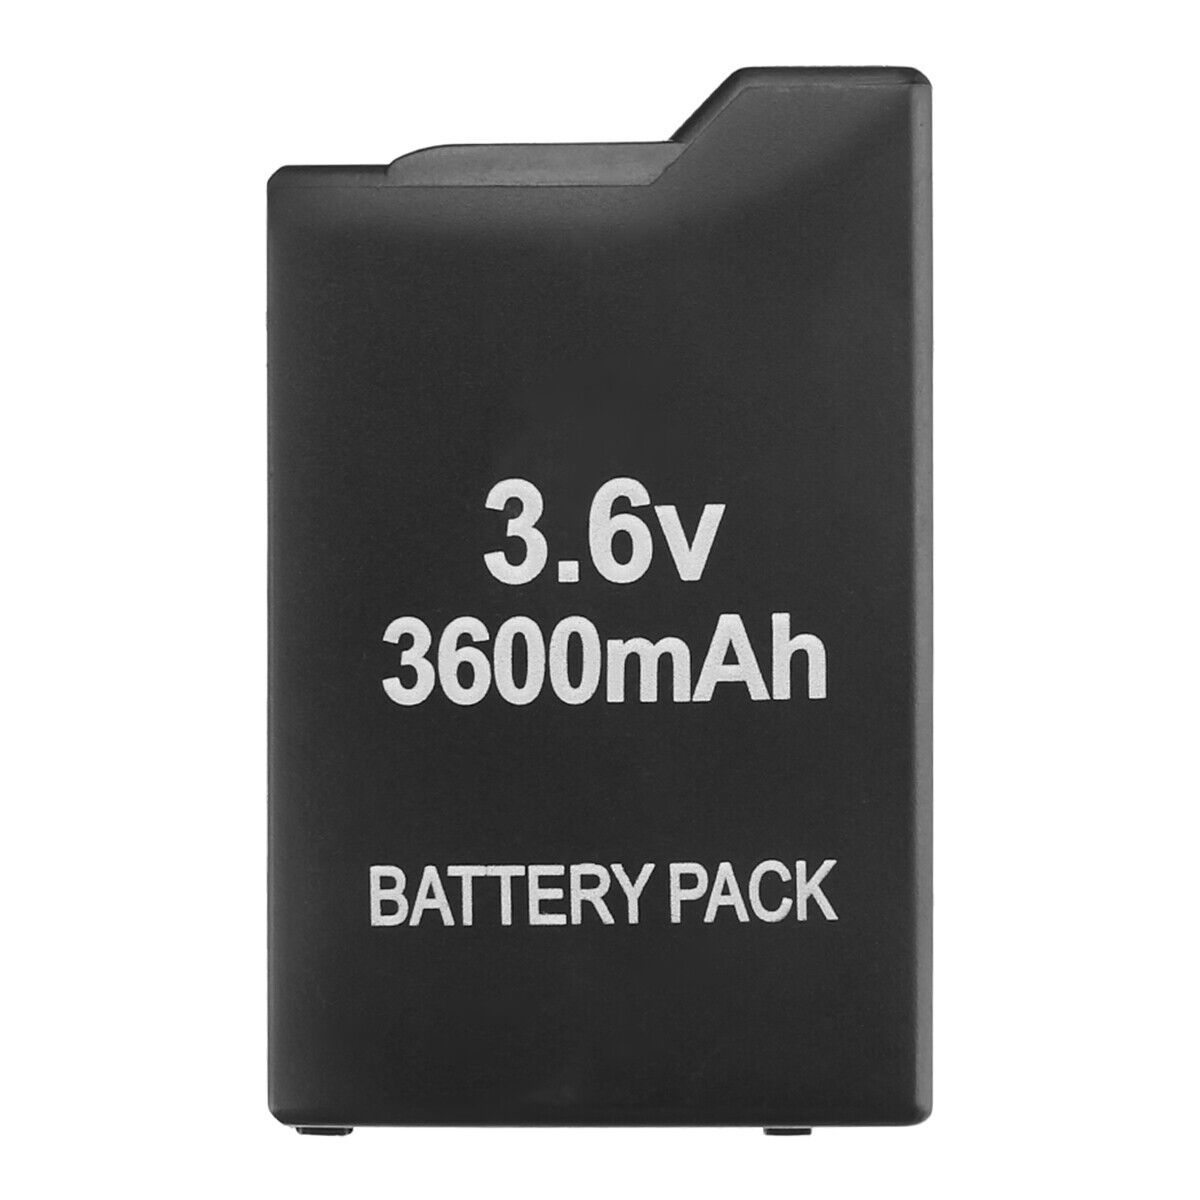 2 Pack - 3600mAh Replacement Battery Packs for Sony PSP PSP-1000 1000 1001 Unbranded Does not apply - фотография #8